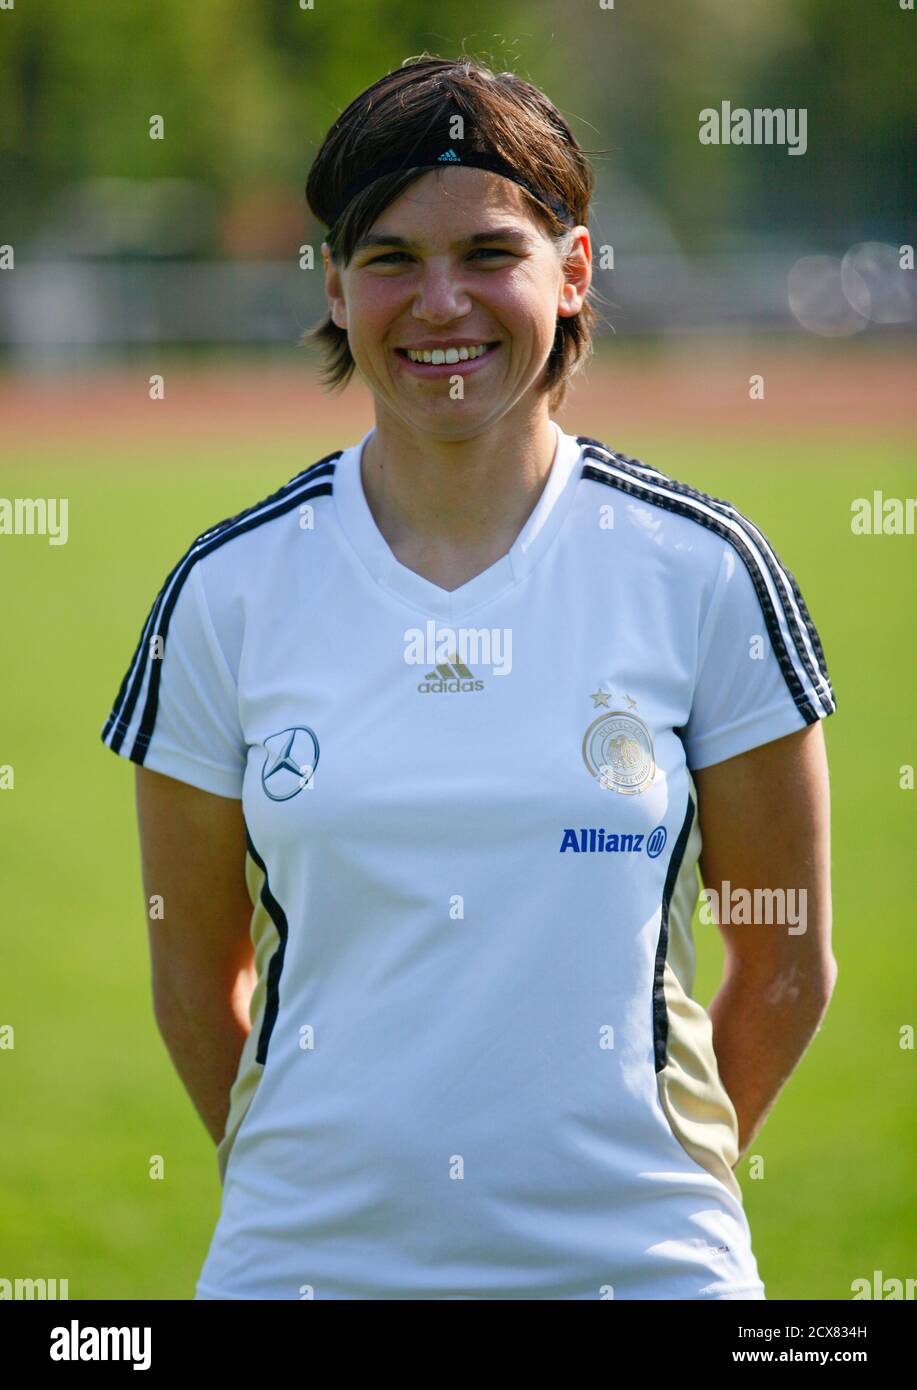 Ariane Hingst of Germany's women's soccer team poses during the official  team photo session in Cologne April 18, 2011. The German team is the  defending champion in the FIFA Women's World Cup